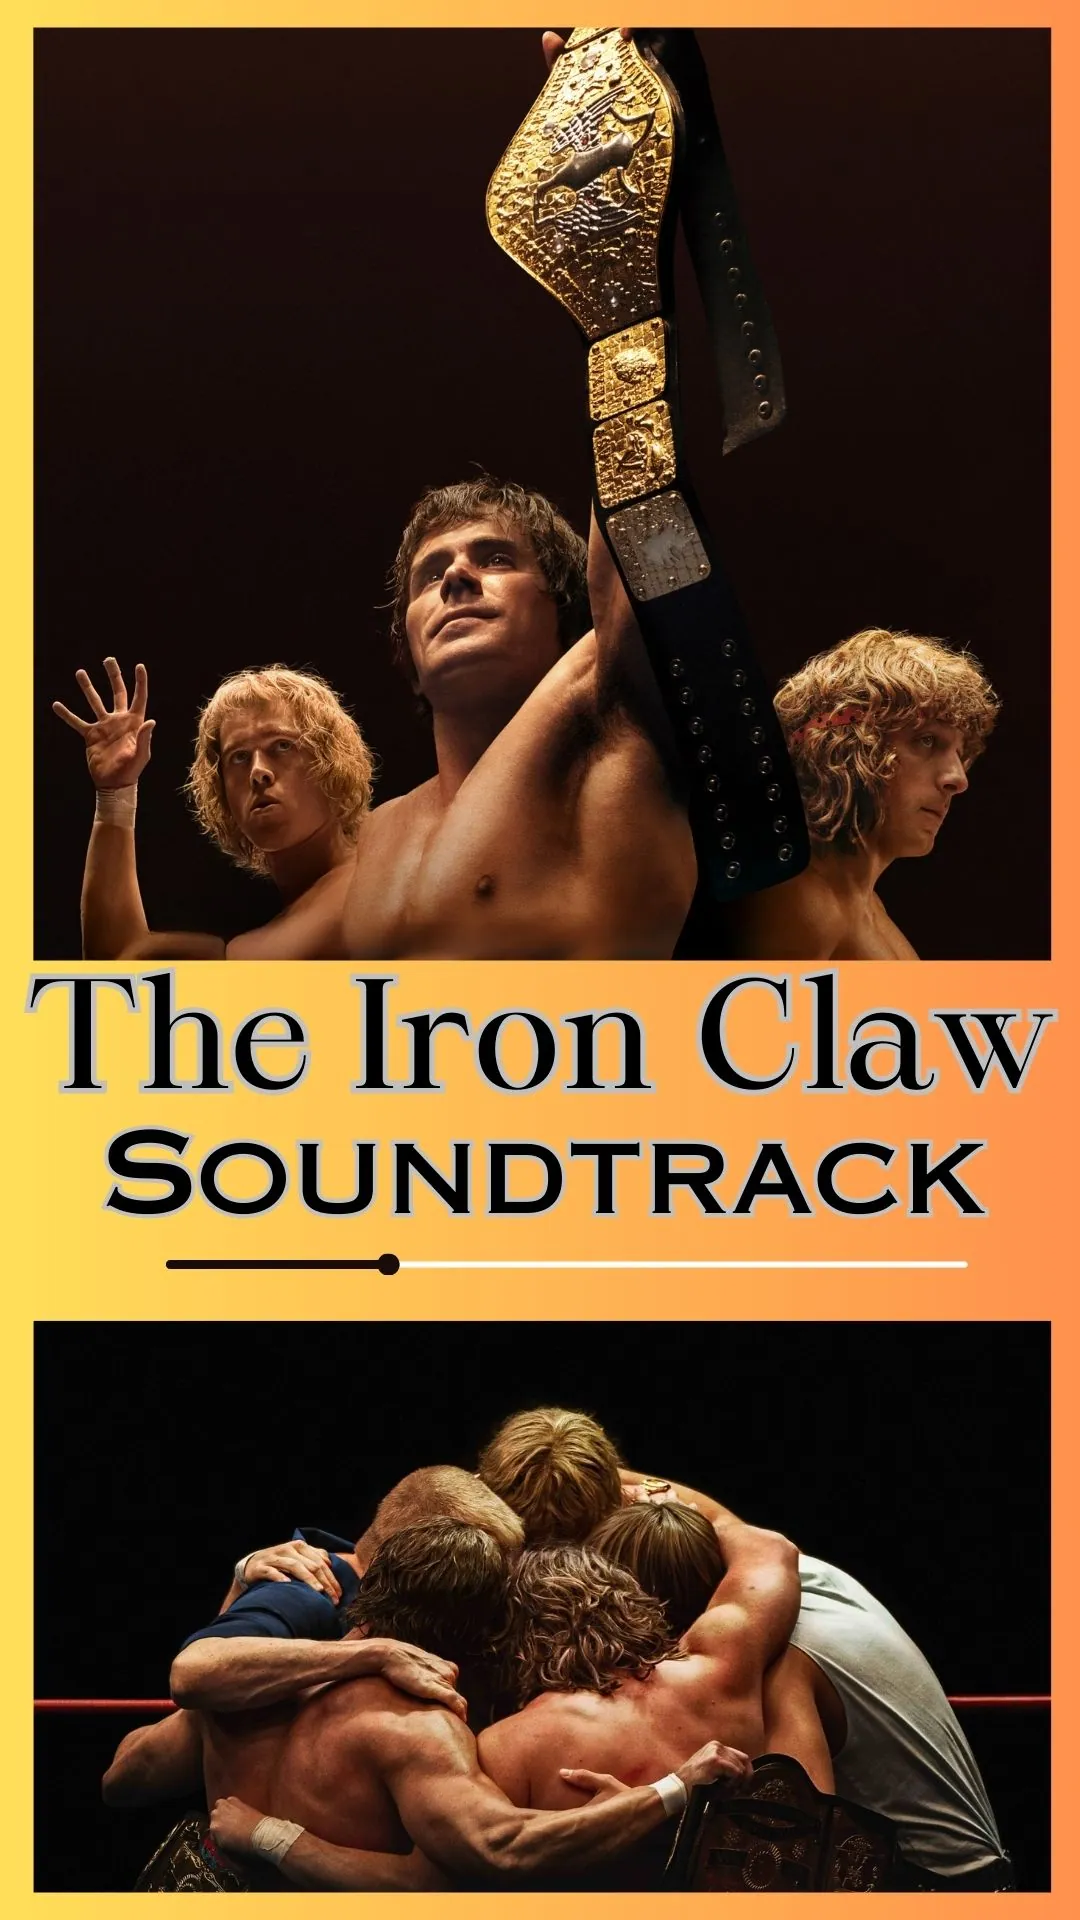 The Iron Claw Soundtrack